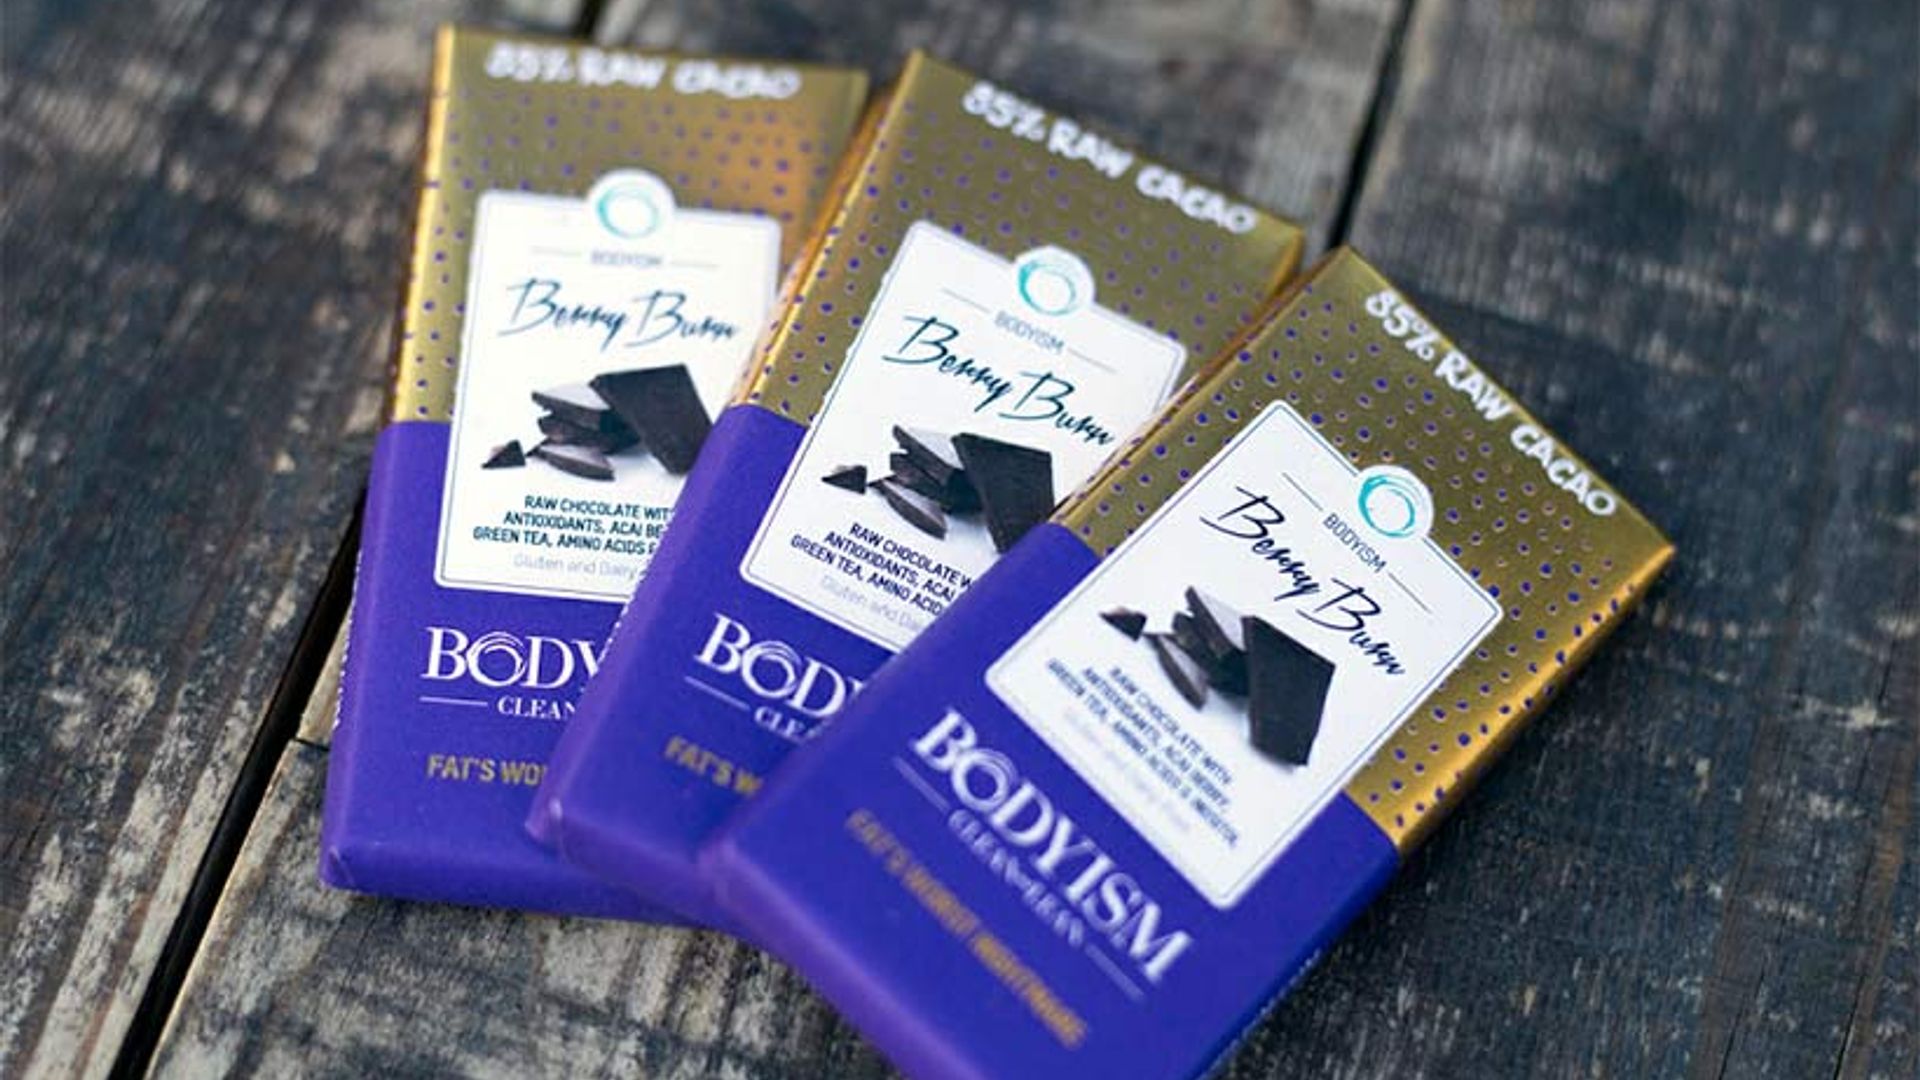 Exclusive: Bodyism founder James Duigan on the success of his superfood chocolate bars